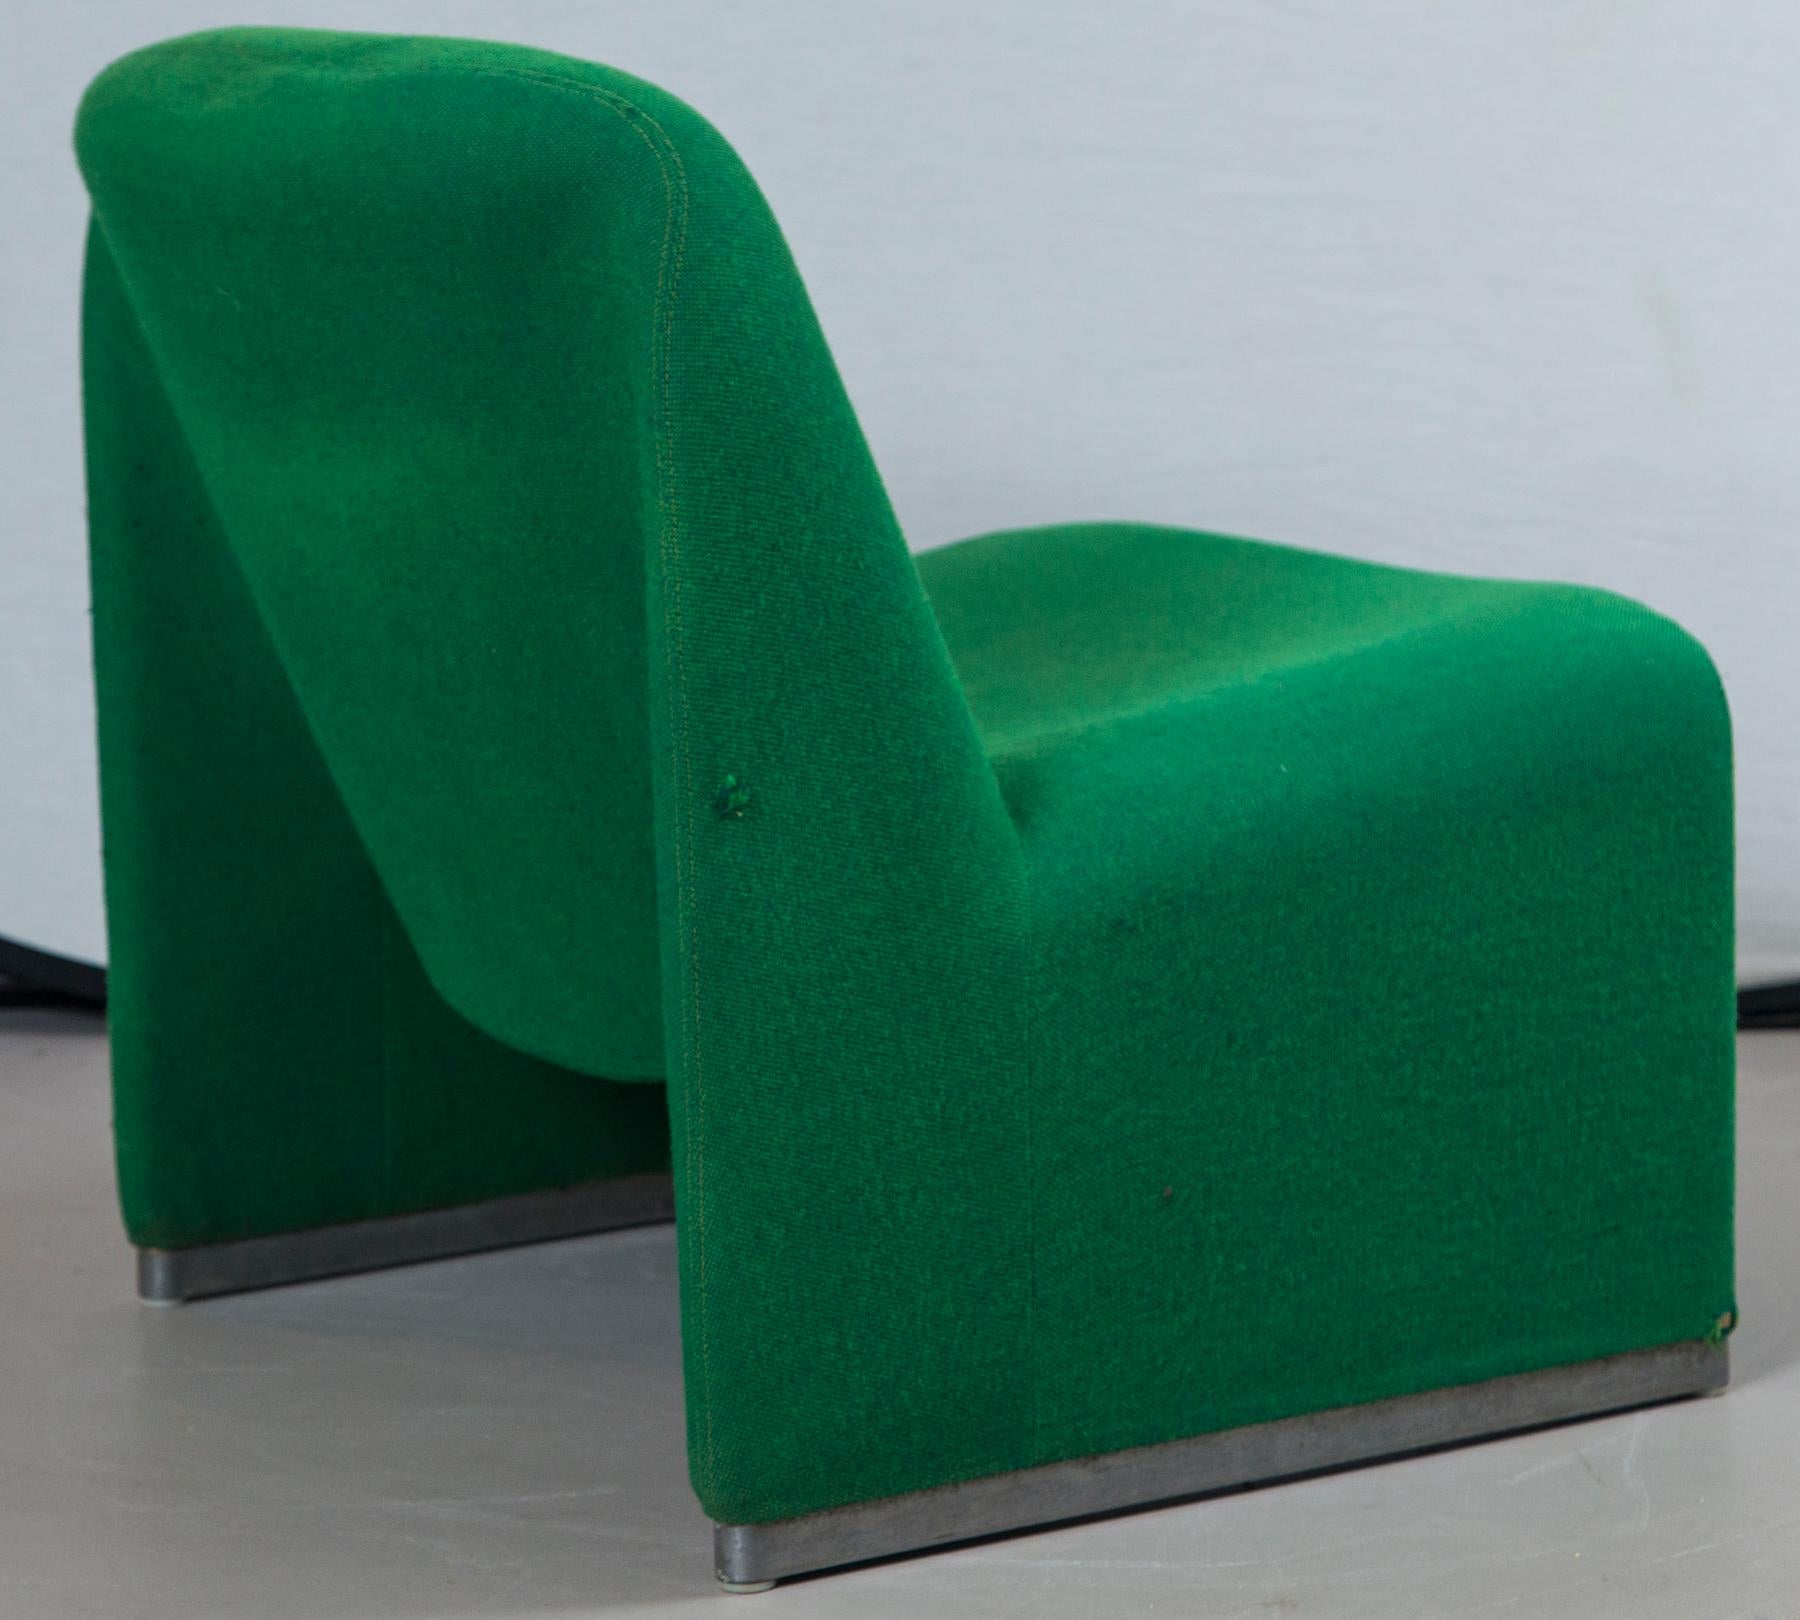 Late 20th Century Pair of Green Alky Chairs by Giancarlo Piretti for Castillo, 1970s